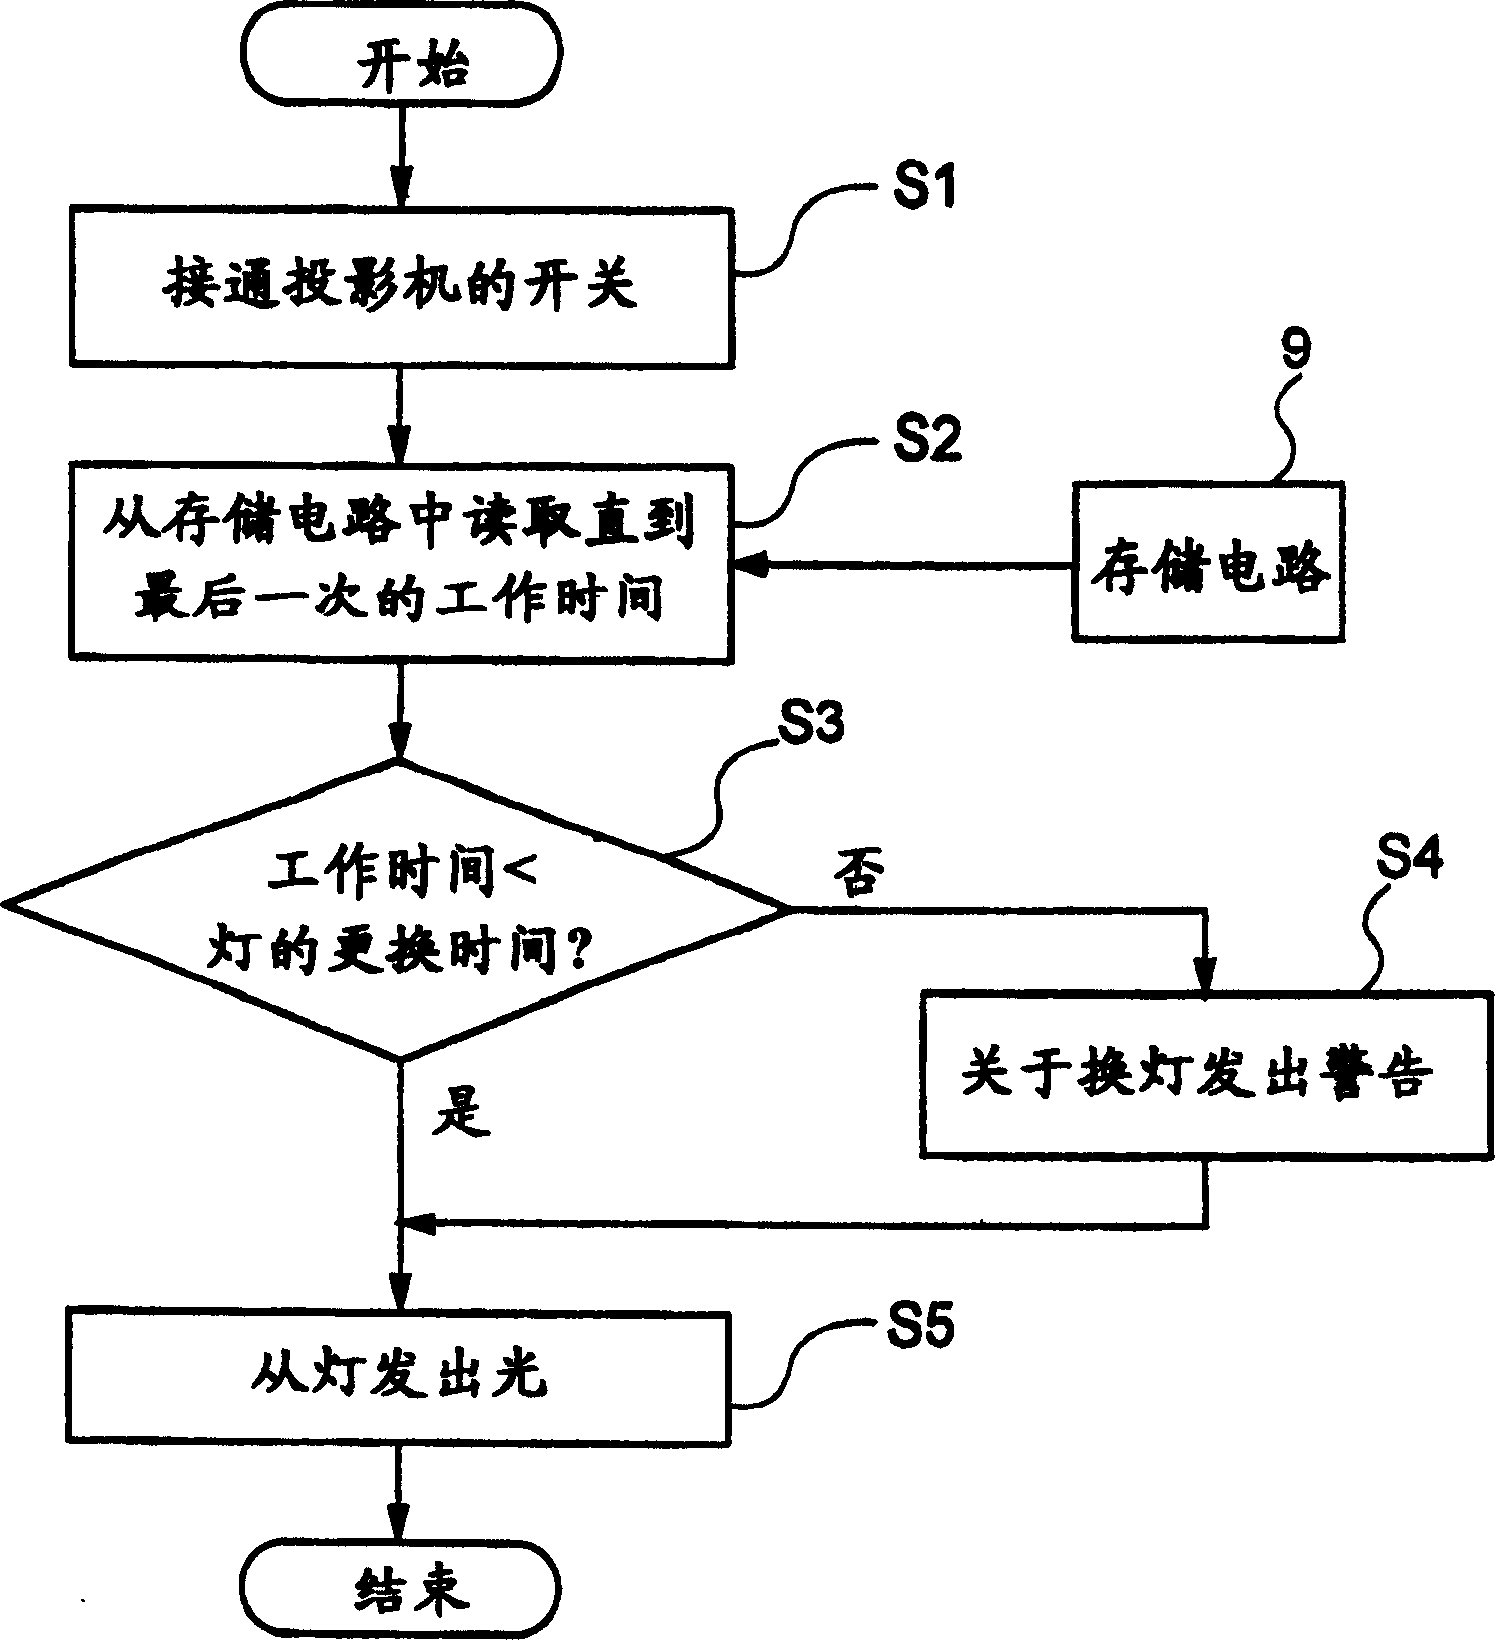 Projector and lamp information managing method